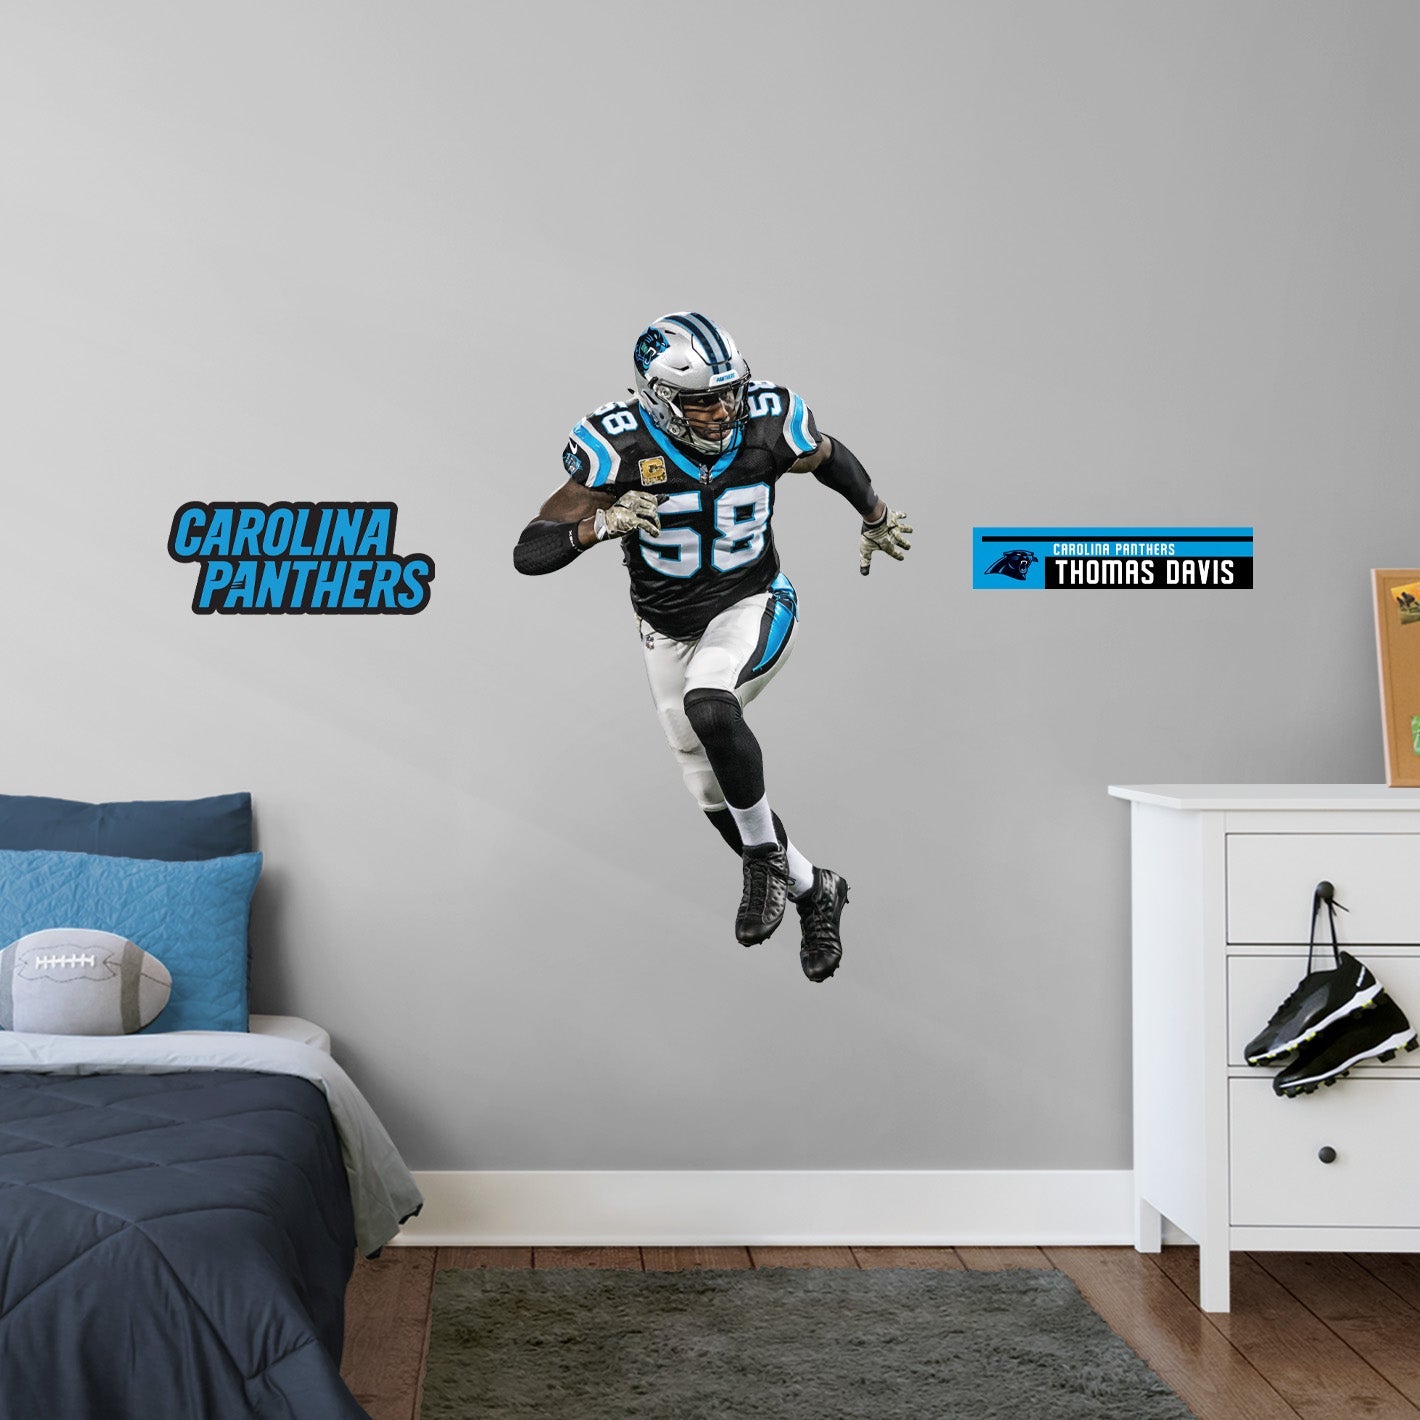 Carolina Panthers: Thomas Davis Legend - Officially Licensed NFL Removable Adhesive Decal